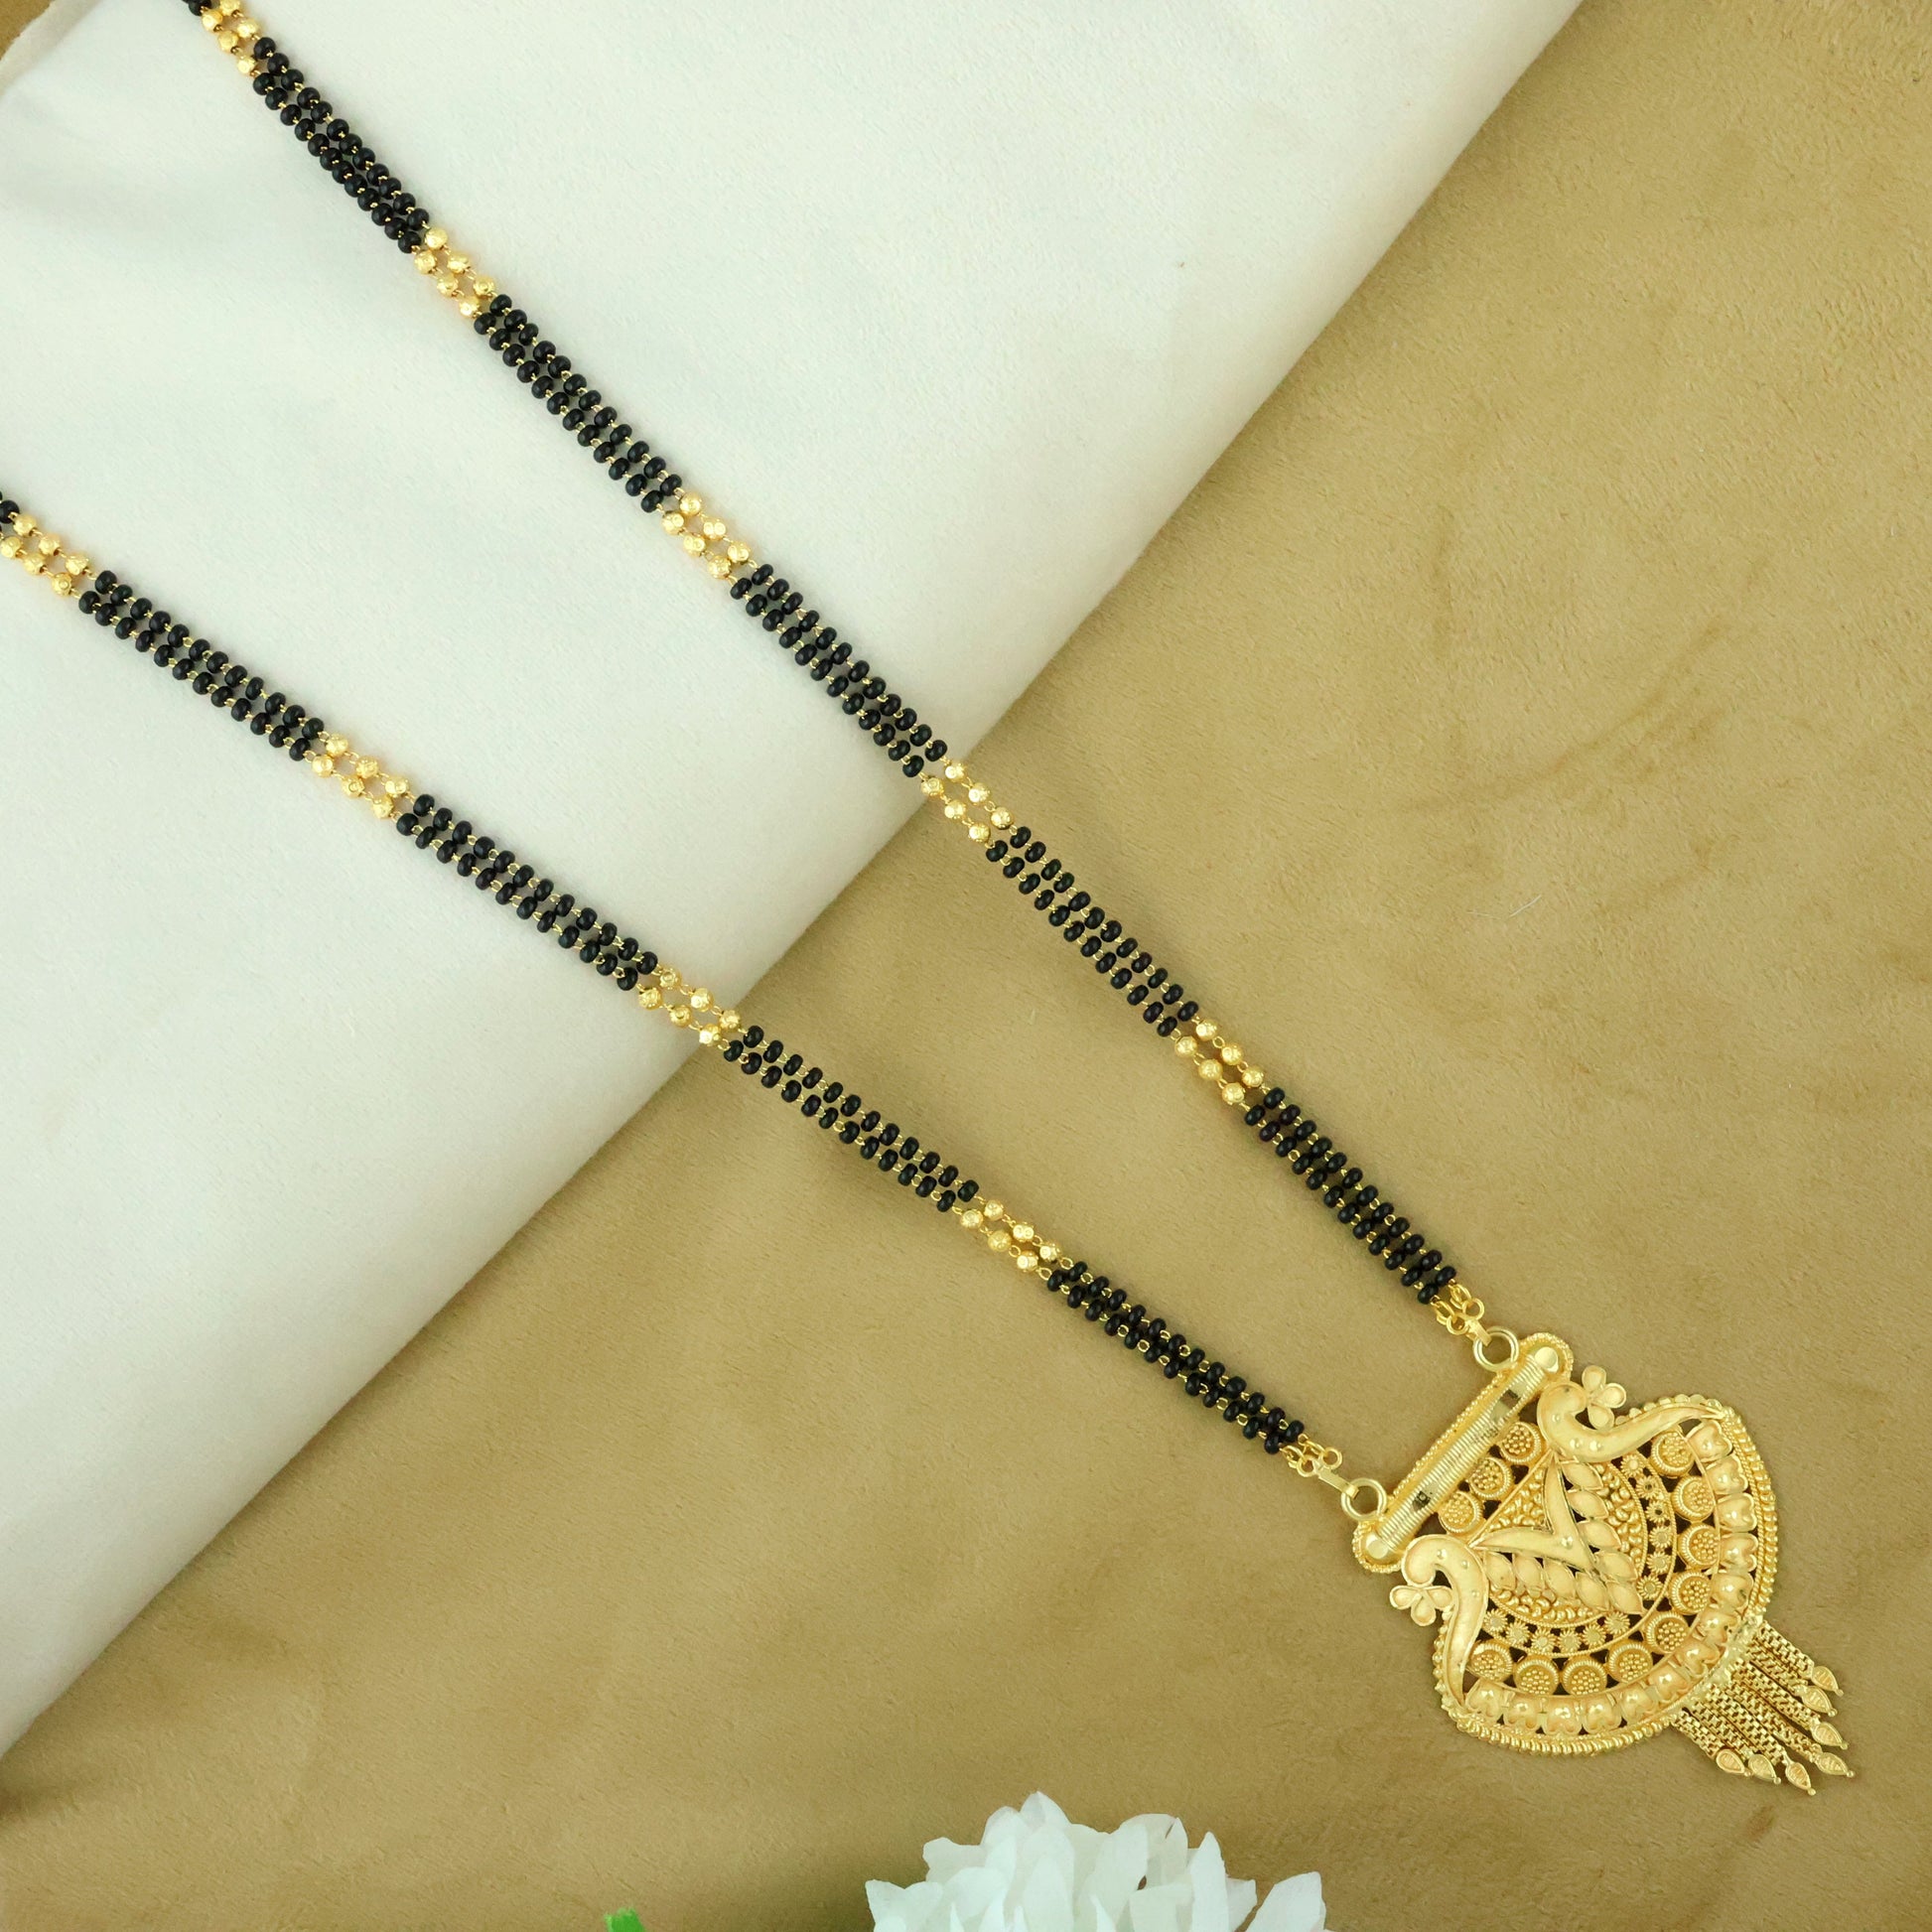 Gold Plated Mangalsutra Long Chain | Buy Mangalsutra online From Bhagya Lakshmi